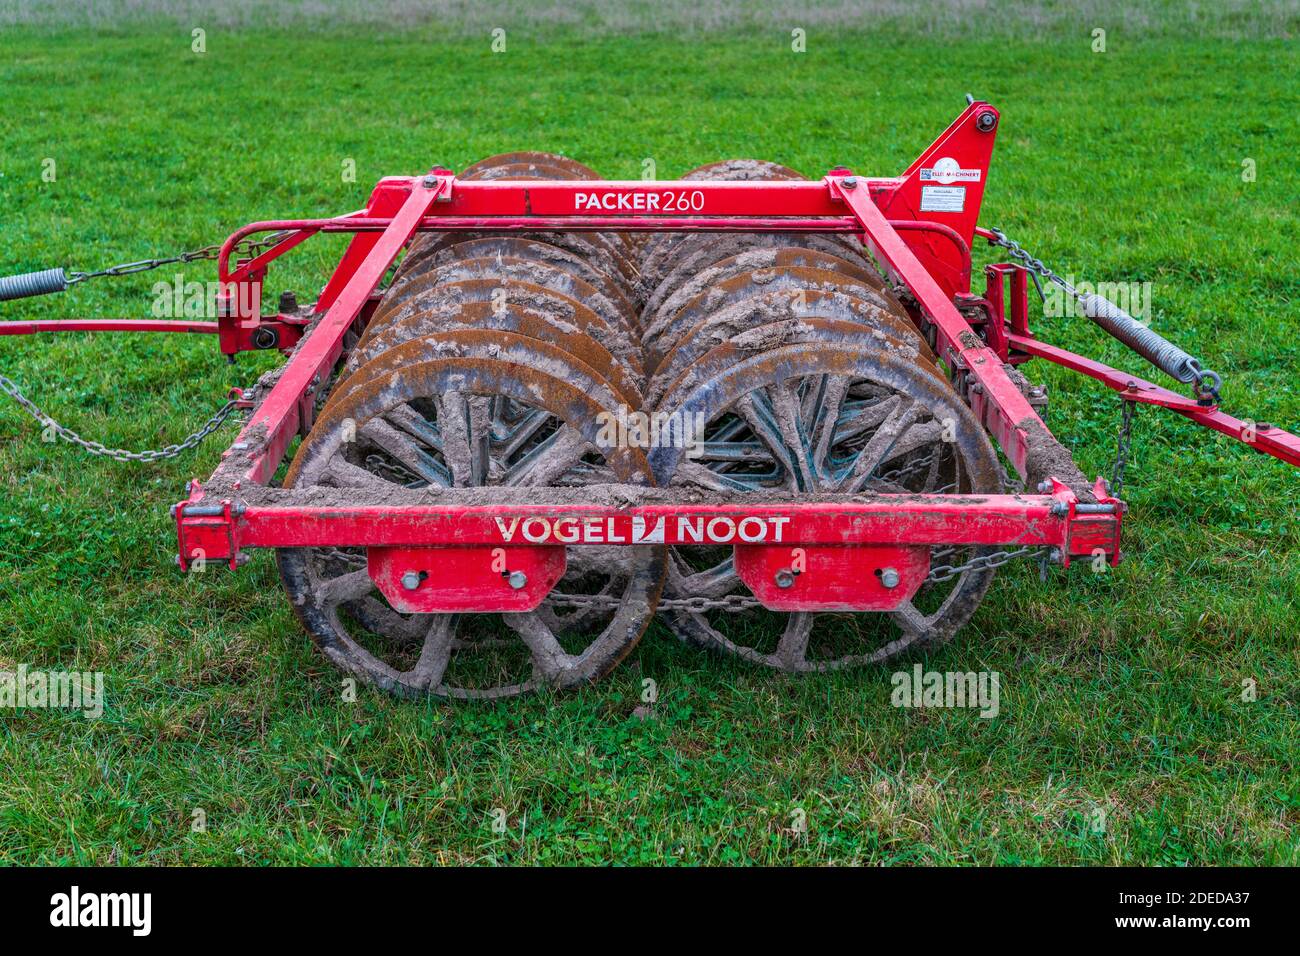 Vogel & Noot Packer 260 pre seeding soil packer or roller farm machinery. Soil Packers and rollers are used to create level seedbeds after ploughing. Stock Photo